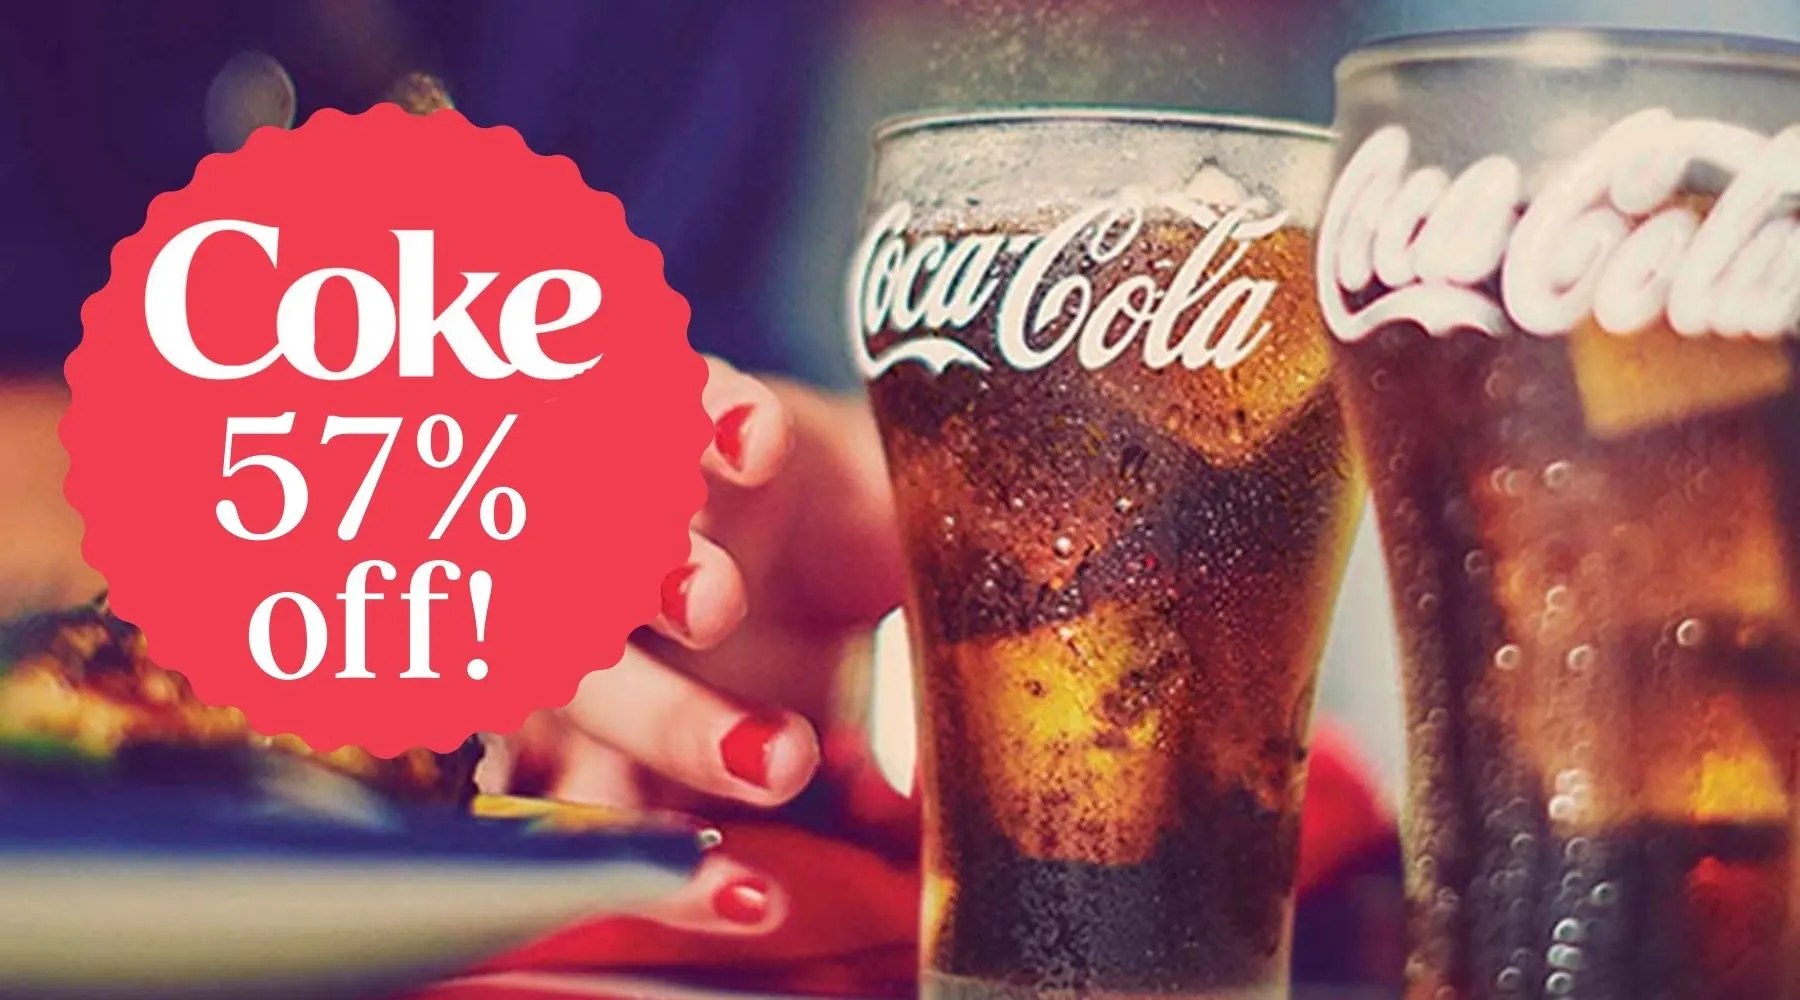 Prime Day’s Coke deals are back with 57% off select multi-packs